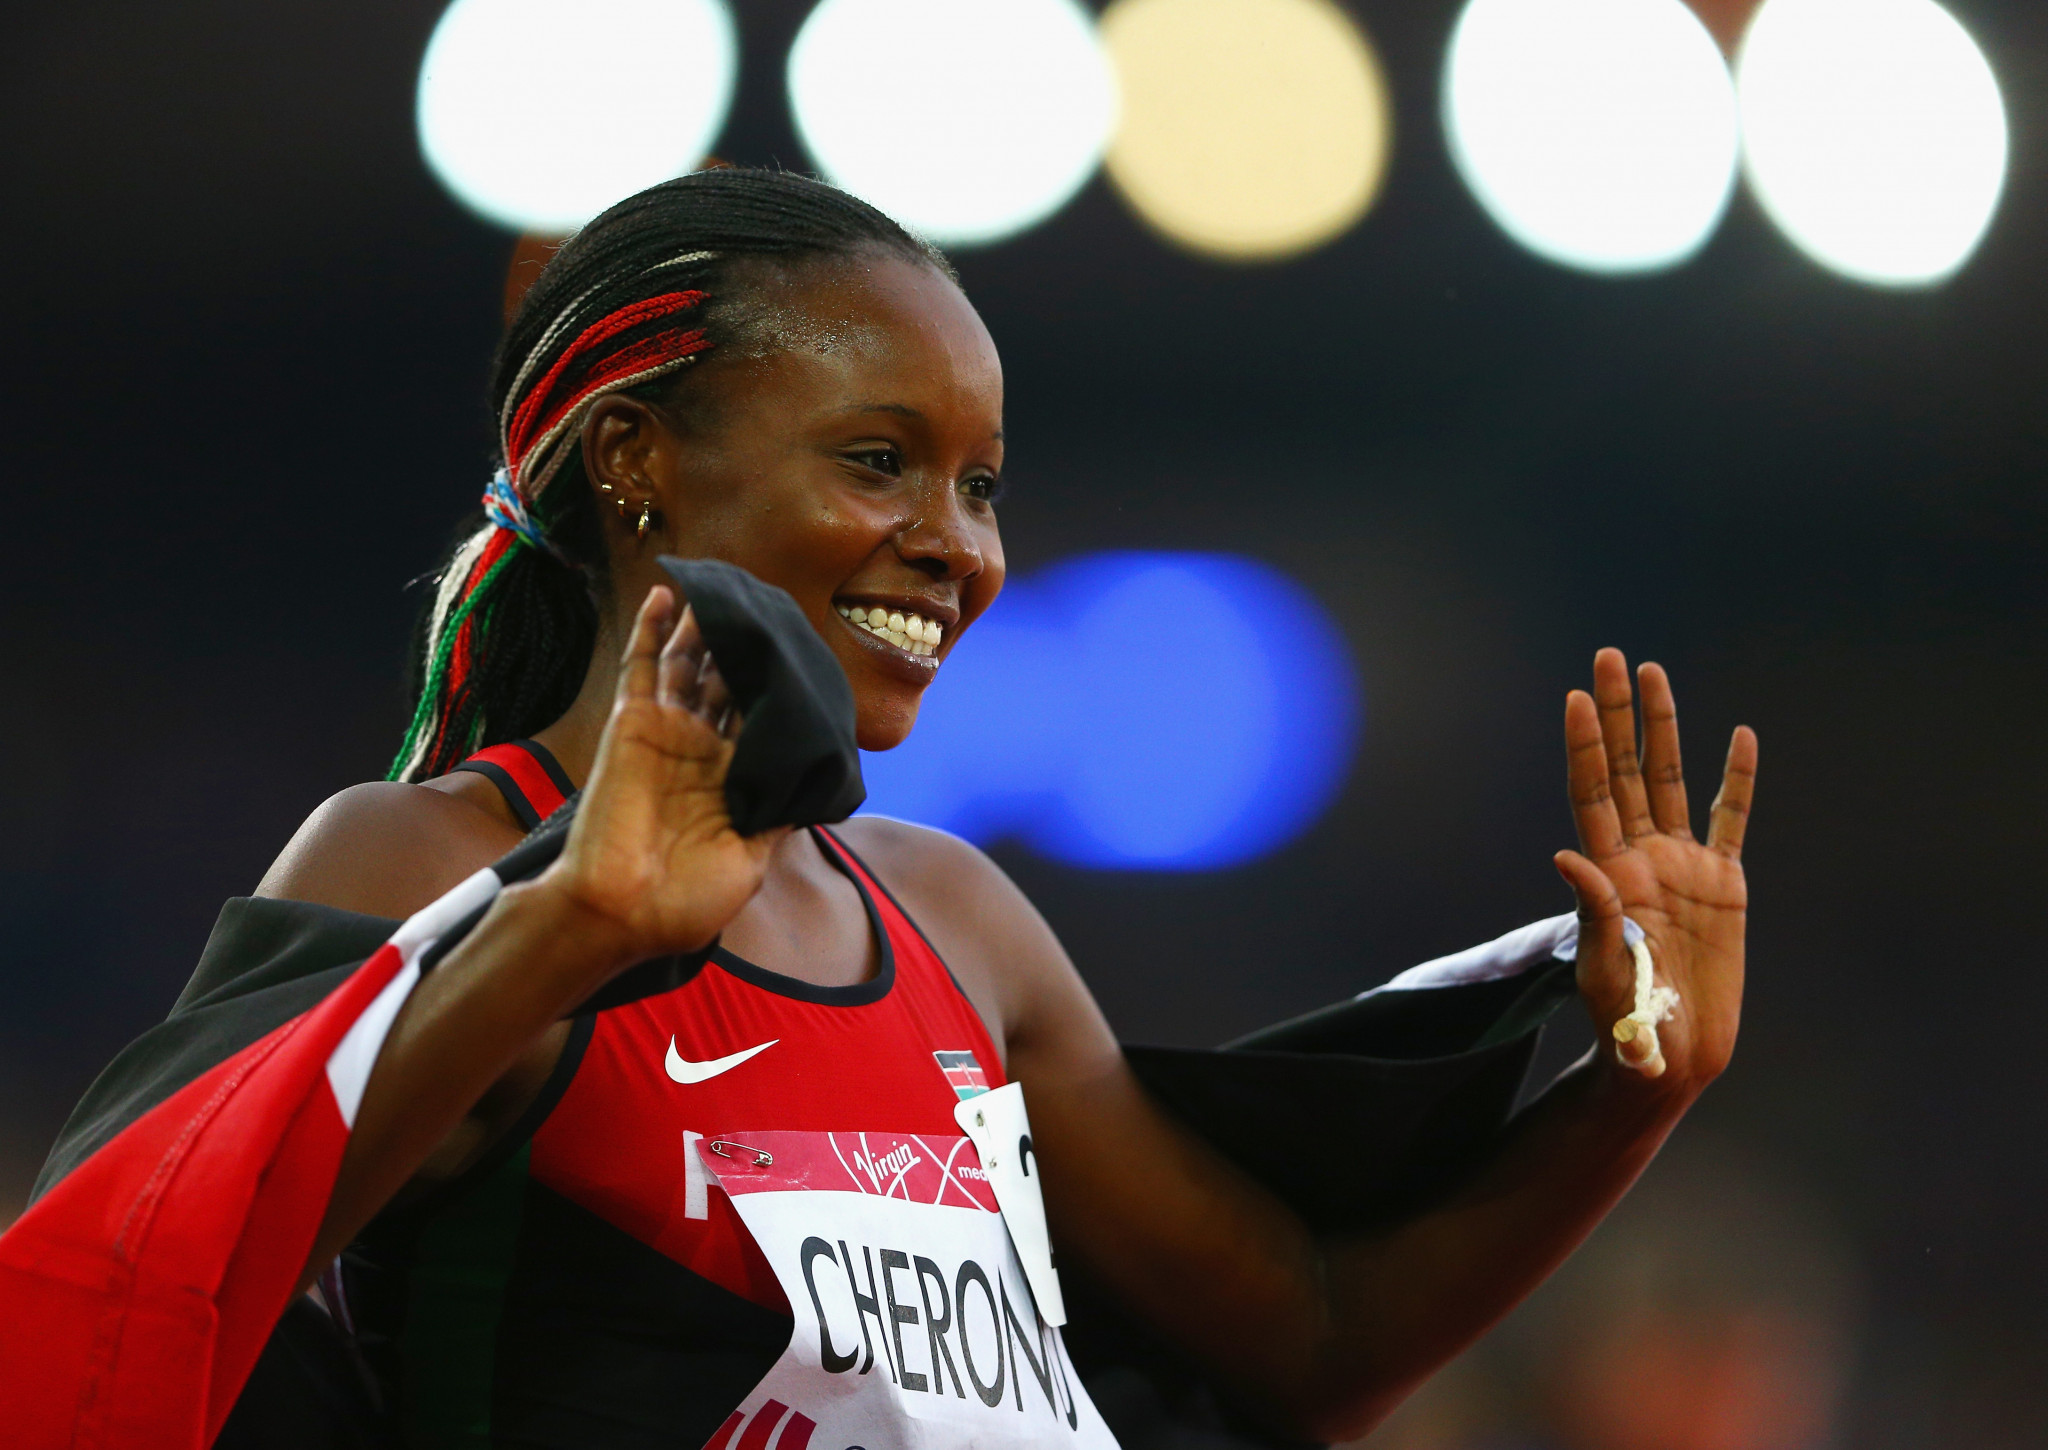 Mercy Cherono, winner of the 5,000m at Glasgow 2014, is among six defending Commonwealth Games champions from set to miss Gold Coast 2018 ©Getty Images